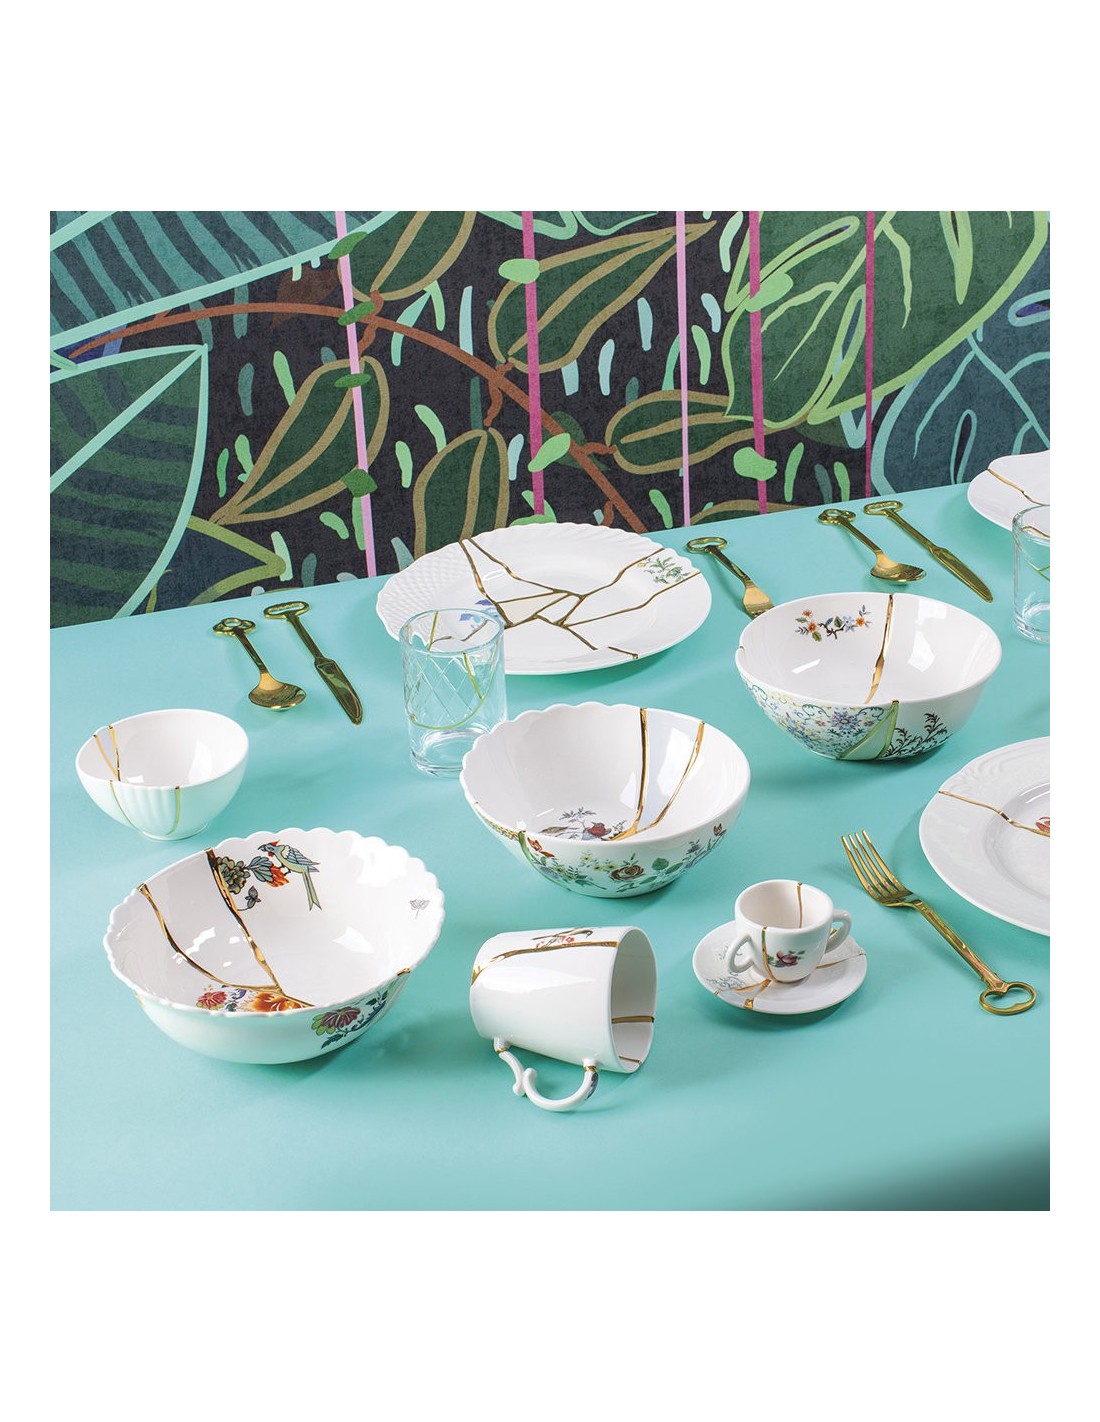 Buy SELETTI Kintsugi Porcelain Plate online? Fast and safe delivery!